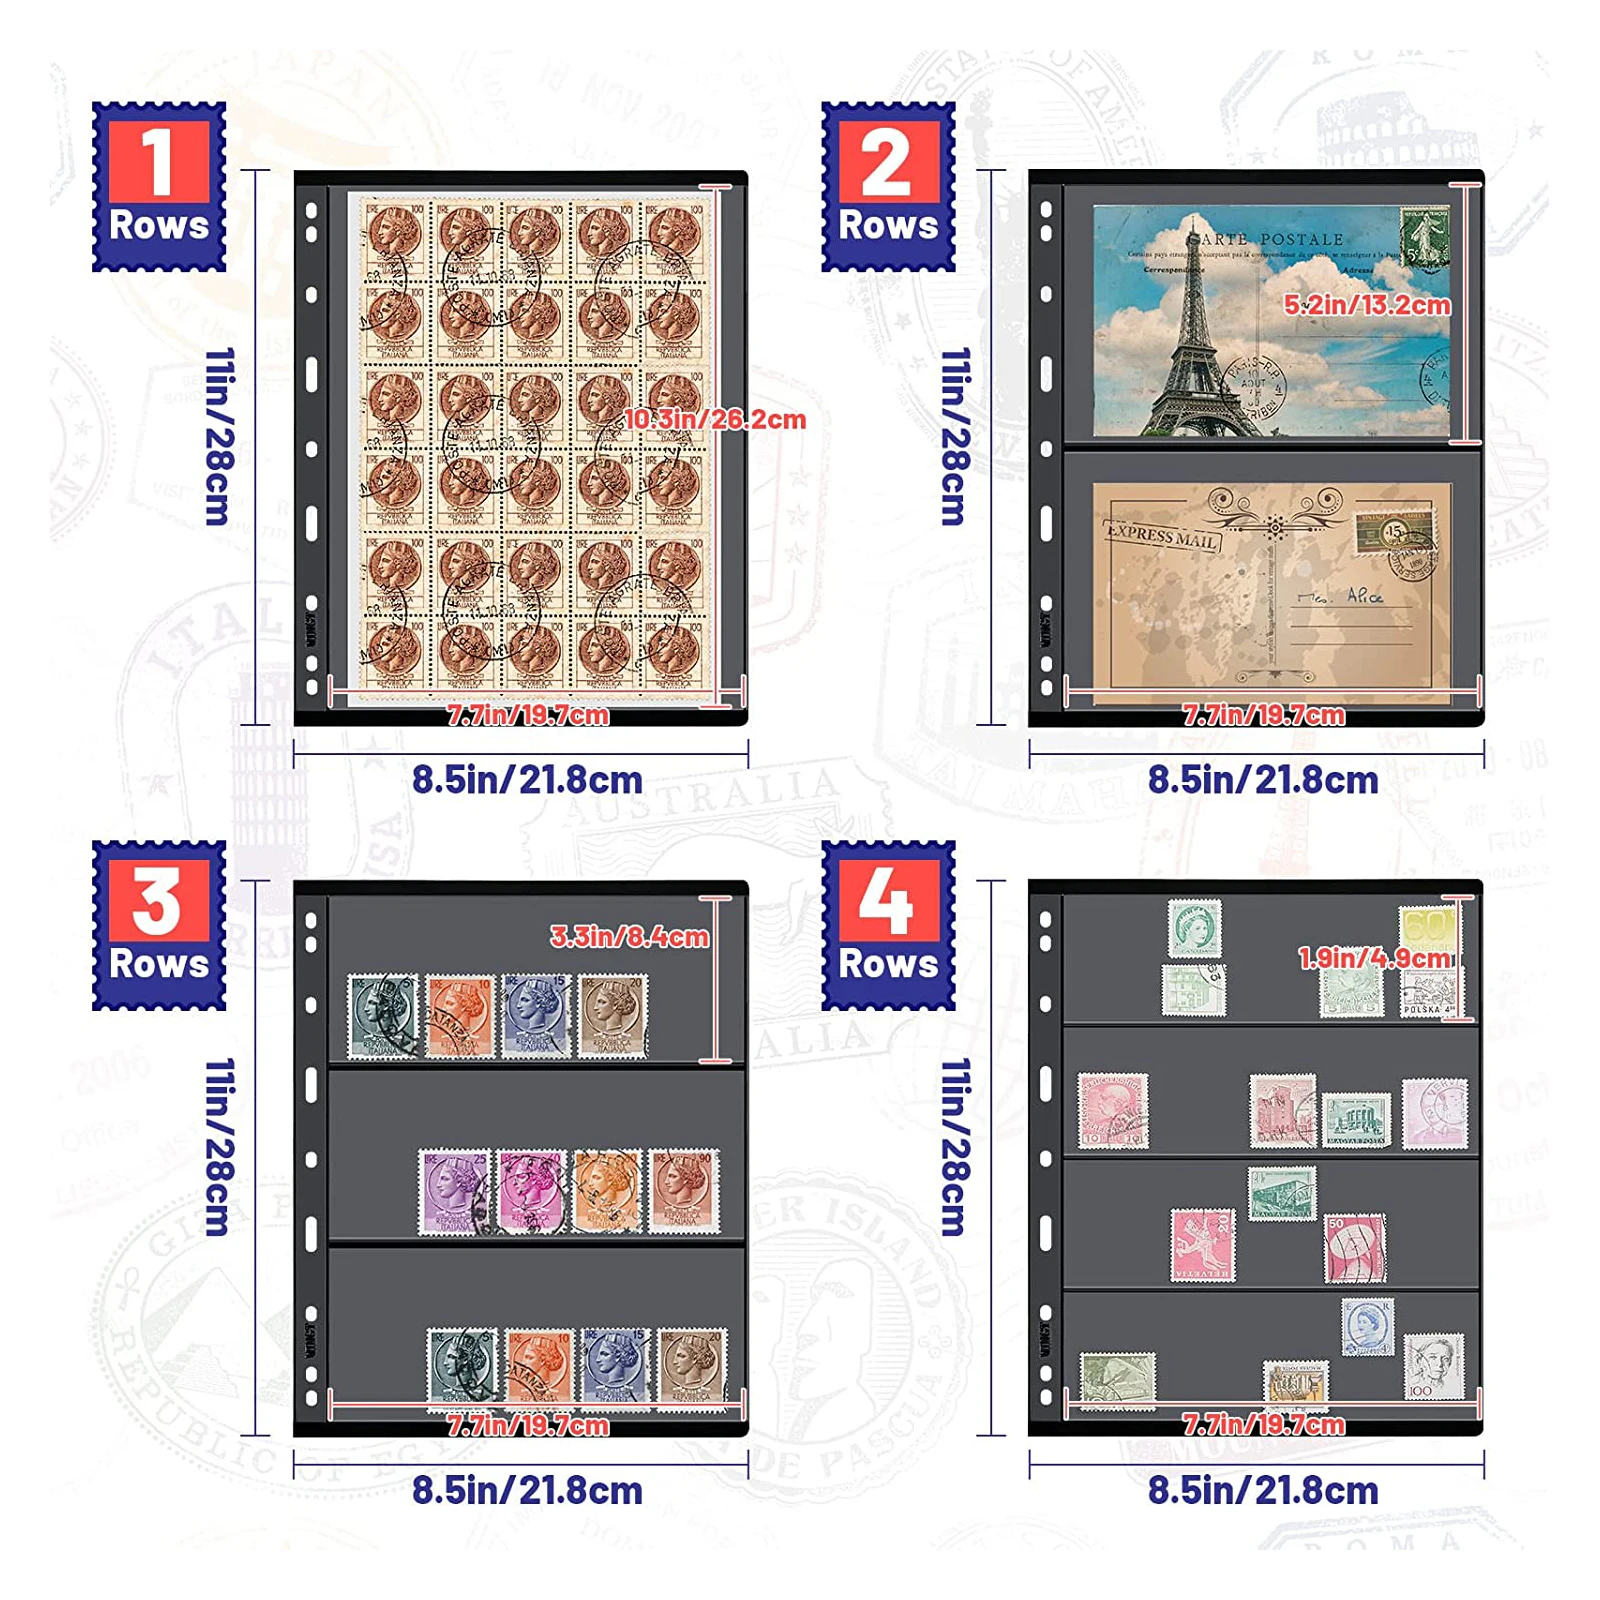 20 Sheets Stamp Pages Collector Stamp Collecting Album Binder Standard 9  Hole Binder Sleeves for Stamps Collecting Supplies (1 Row)